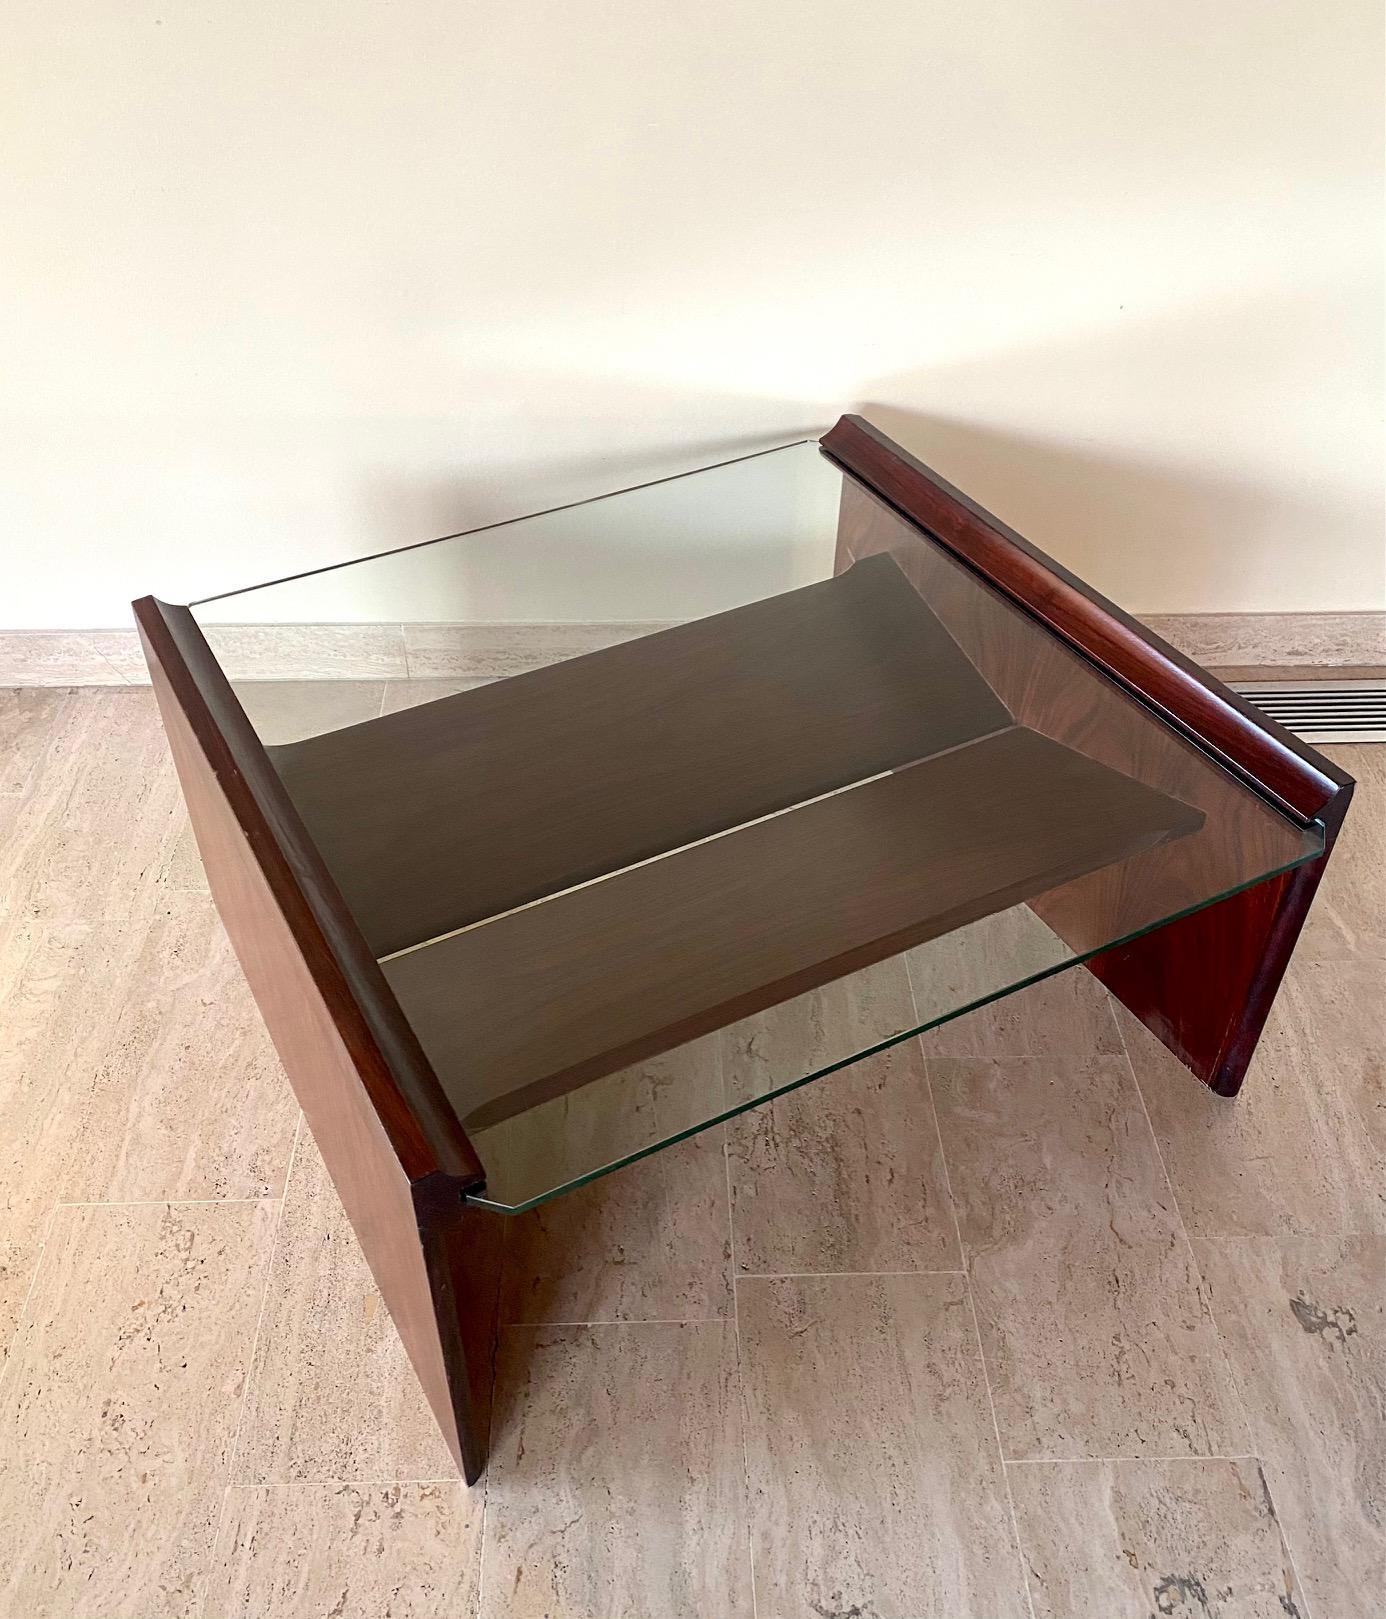 Coffee table produced by Gavina in the 1960s, designed by Kazuhide Takahama, model 